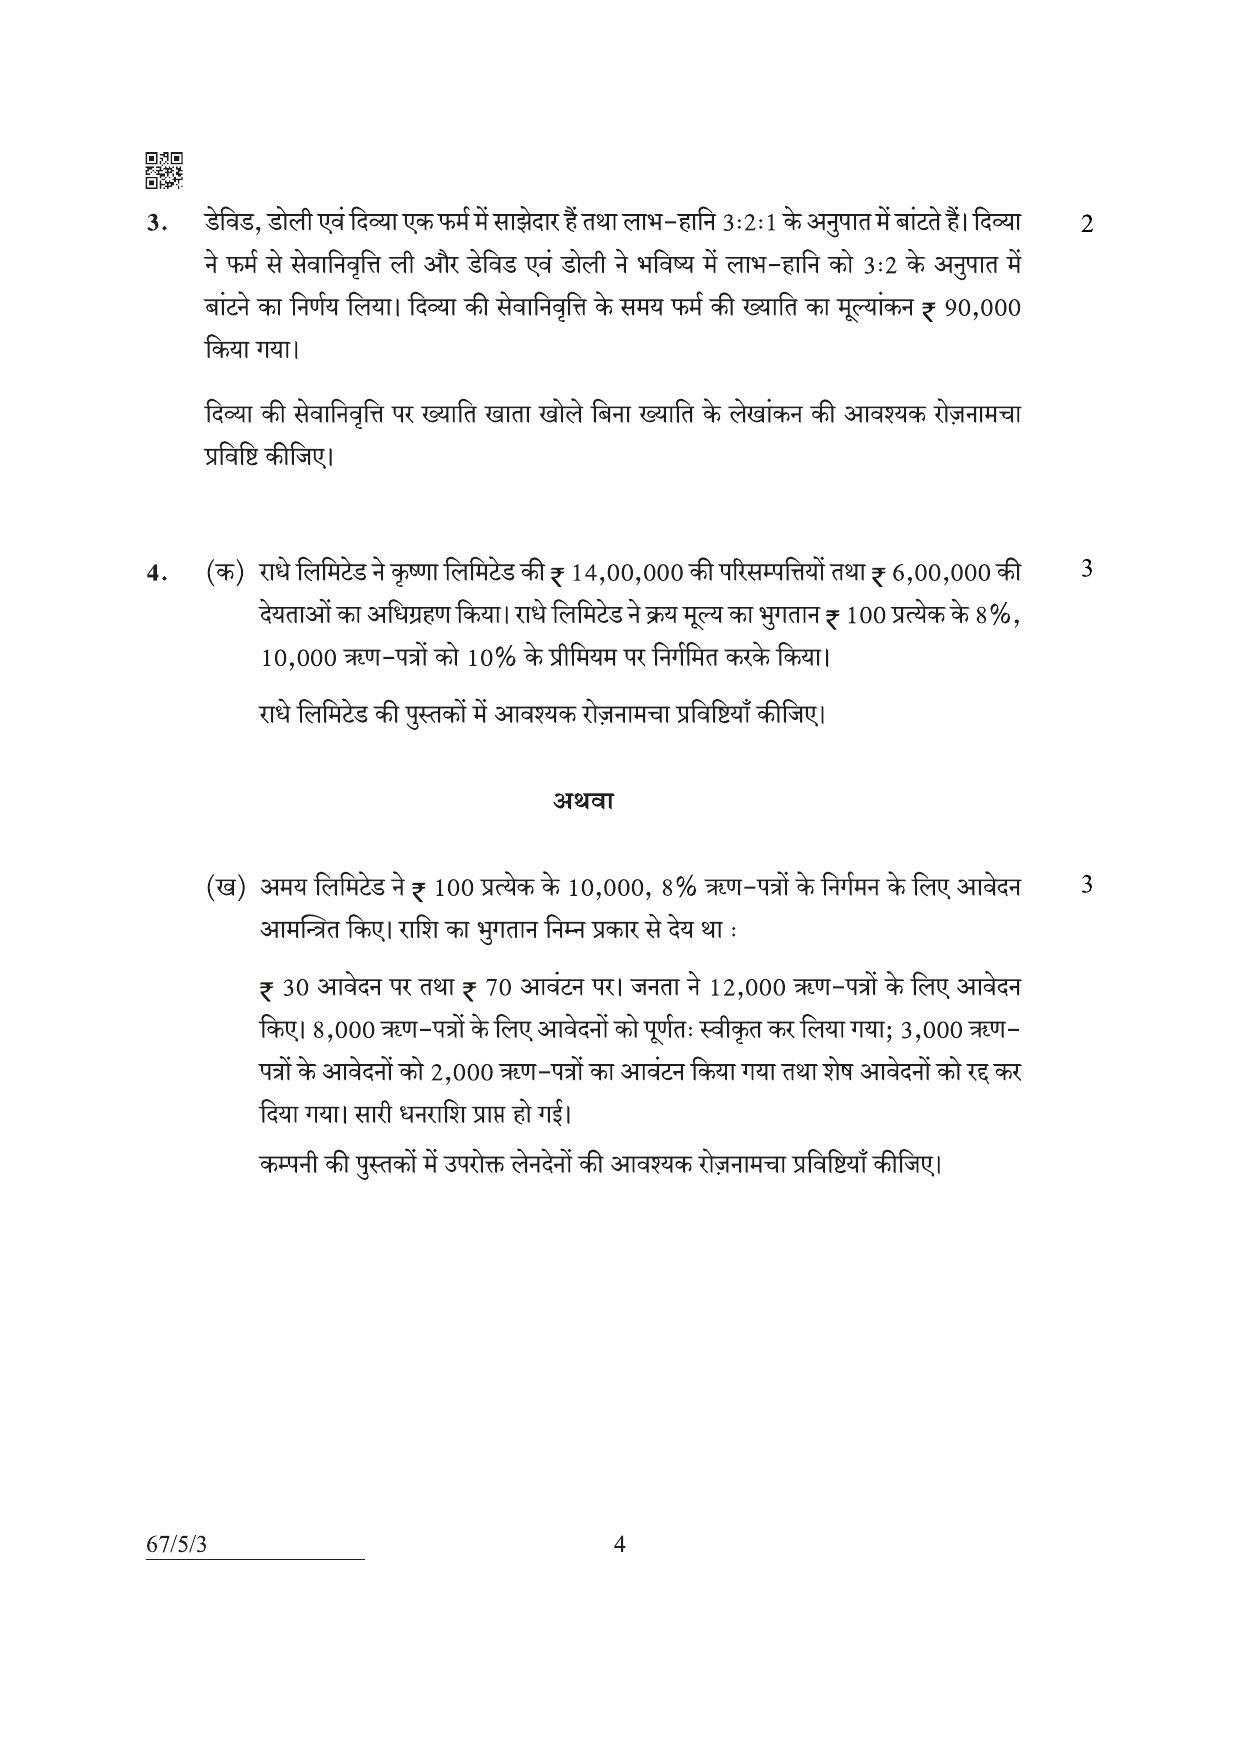 CBSE Class 12 67-5-3 Accountancy 2022 Question Paper - Page 4